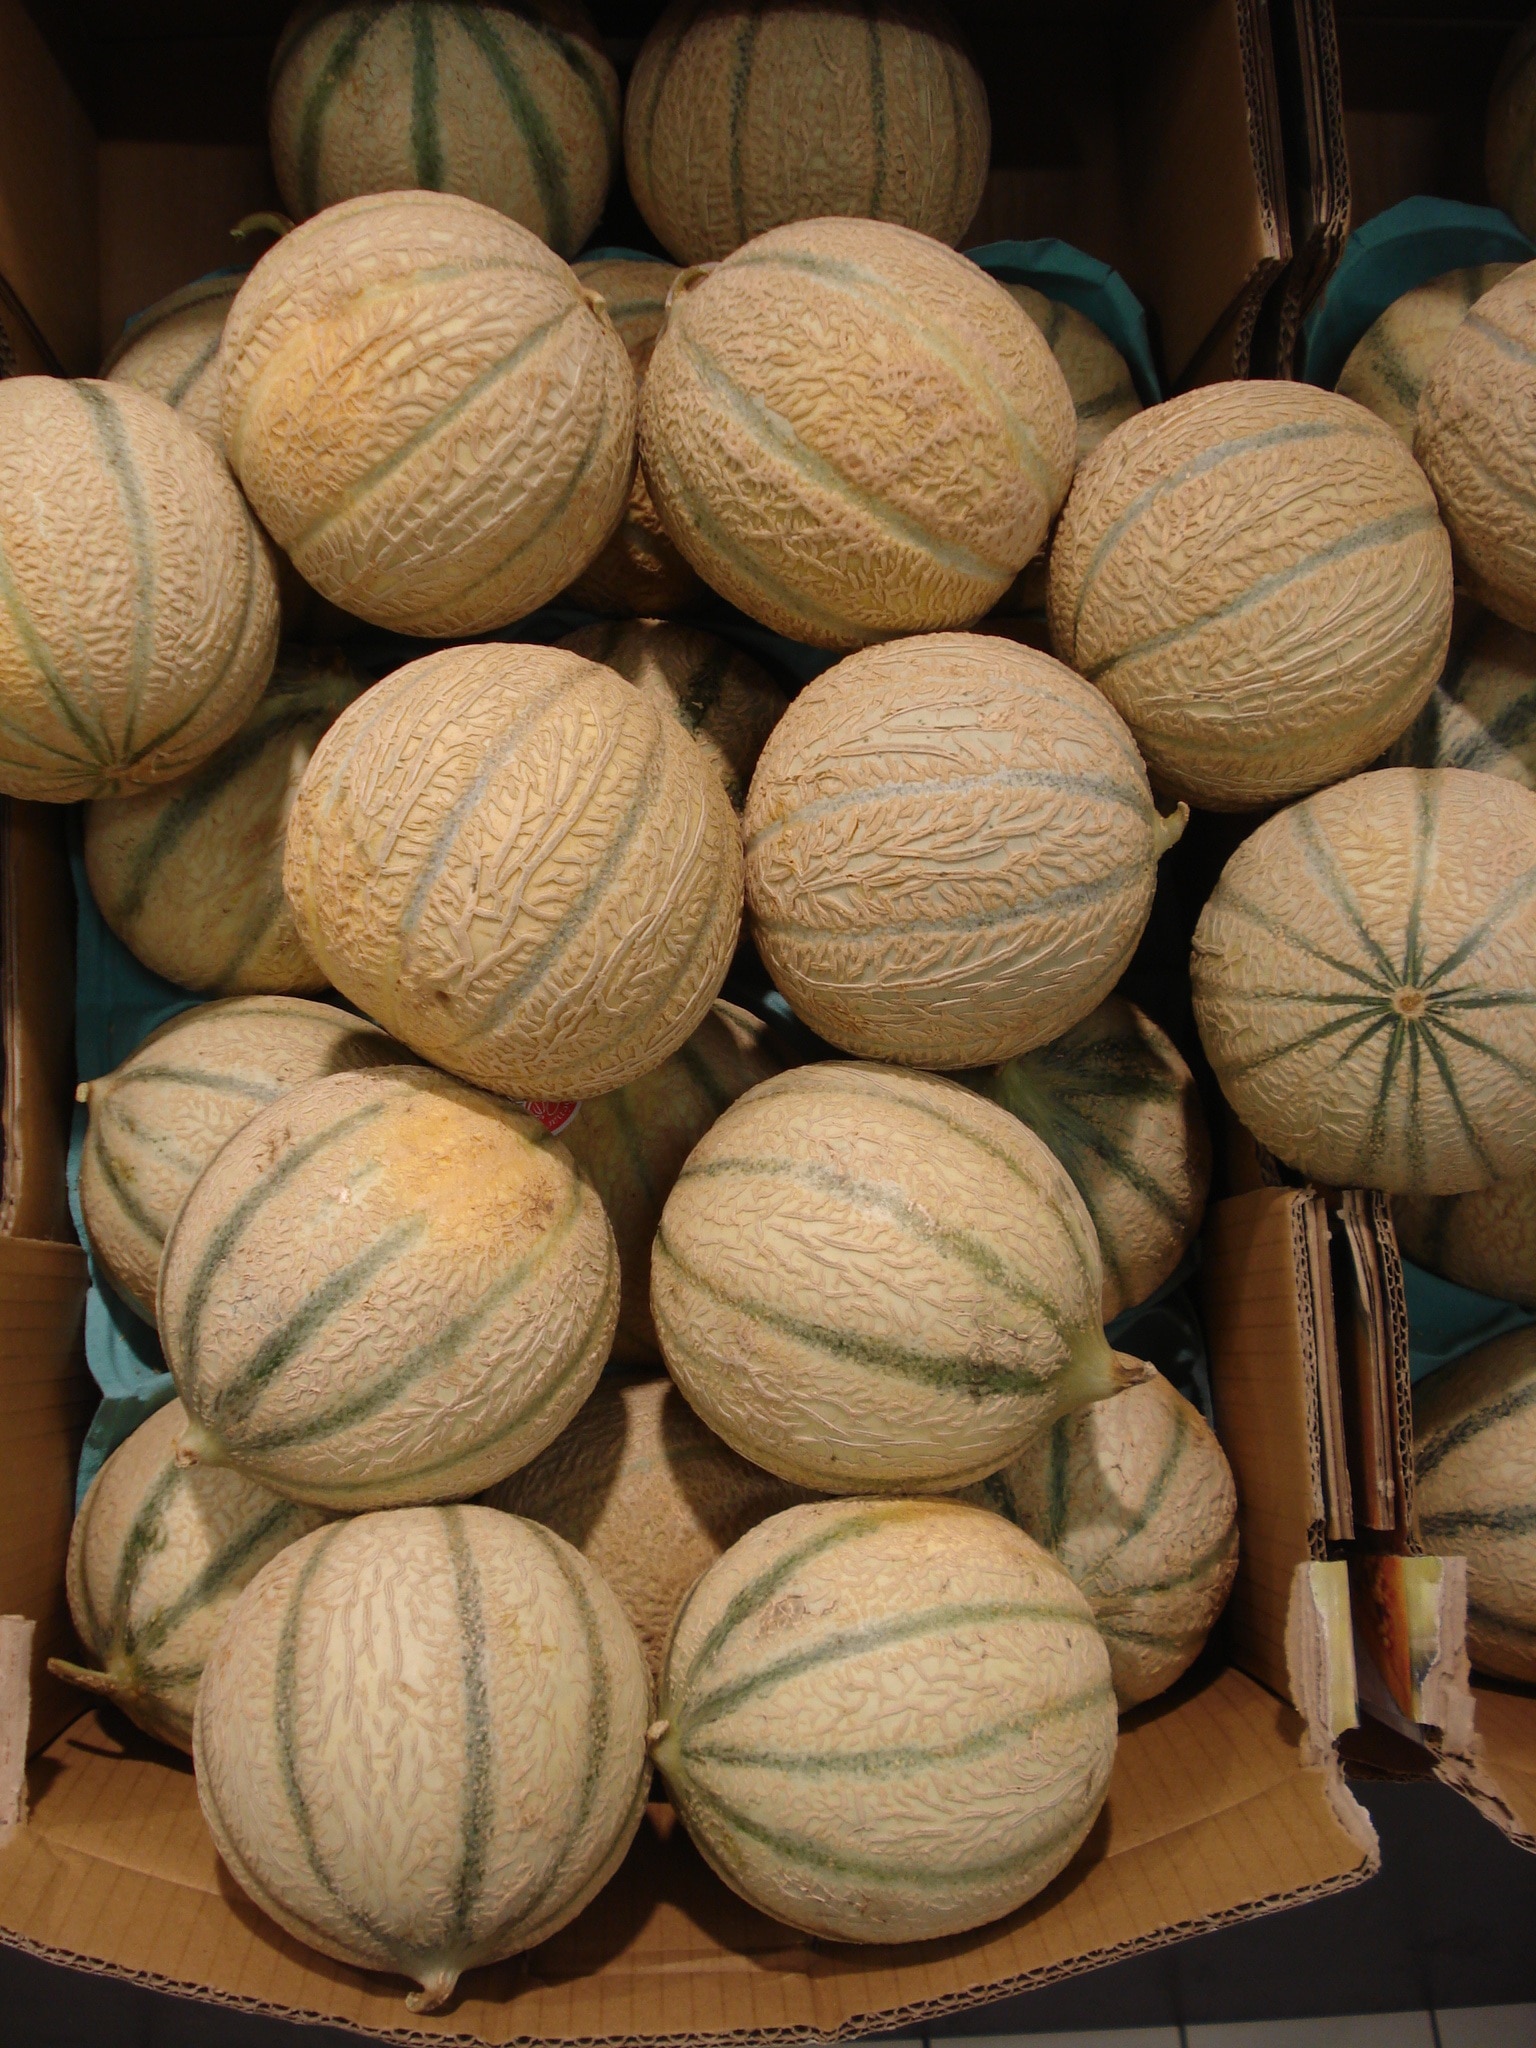 white and green round squashes on box